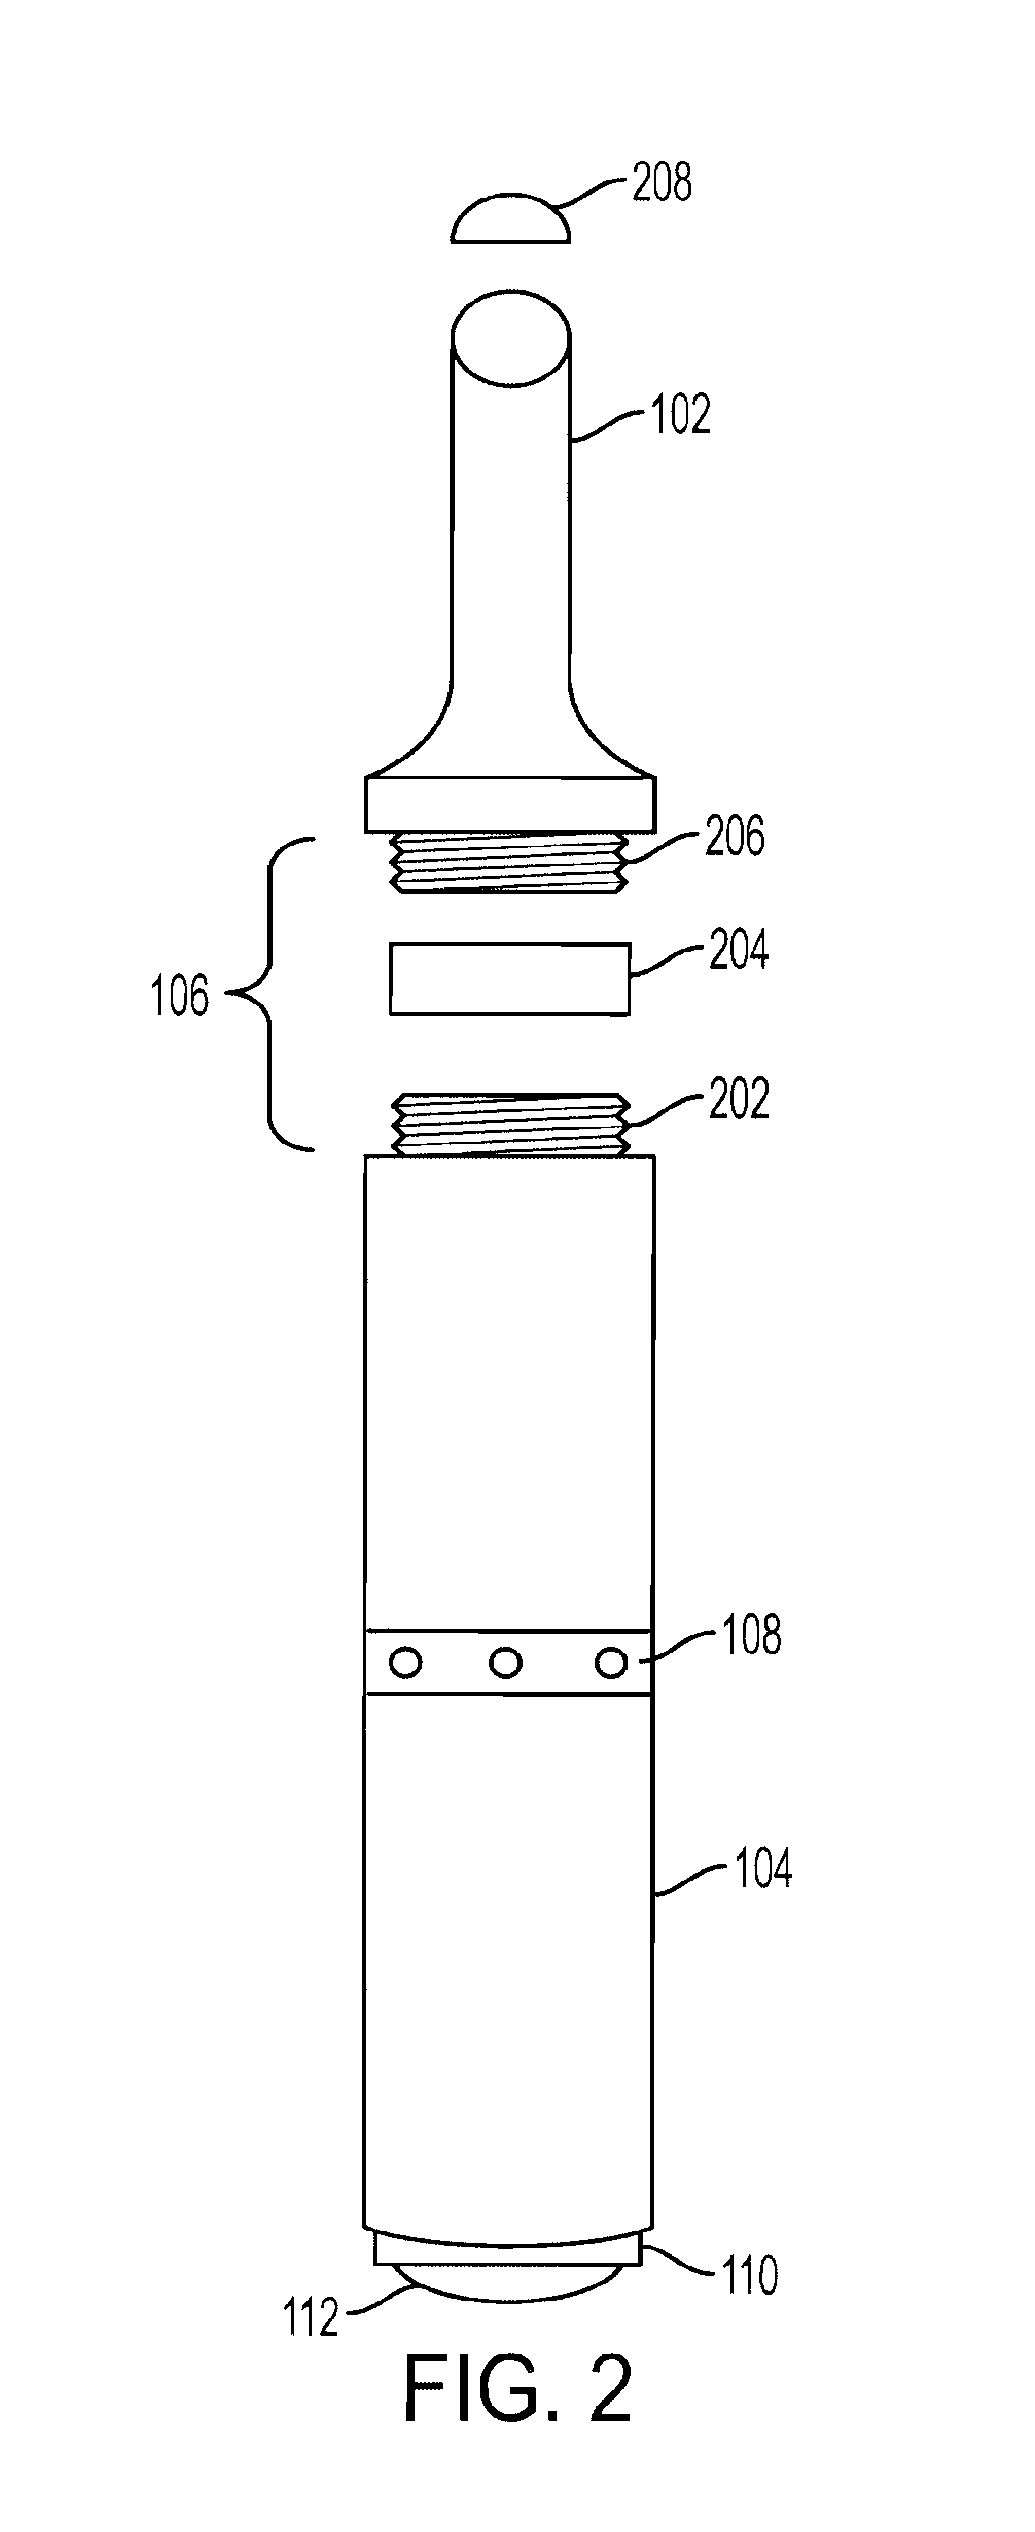 System and method for providing a laser-based lighting system for smokable material